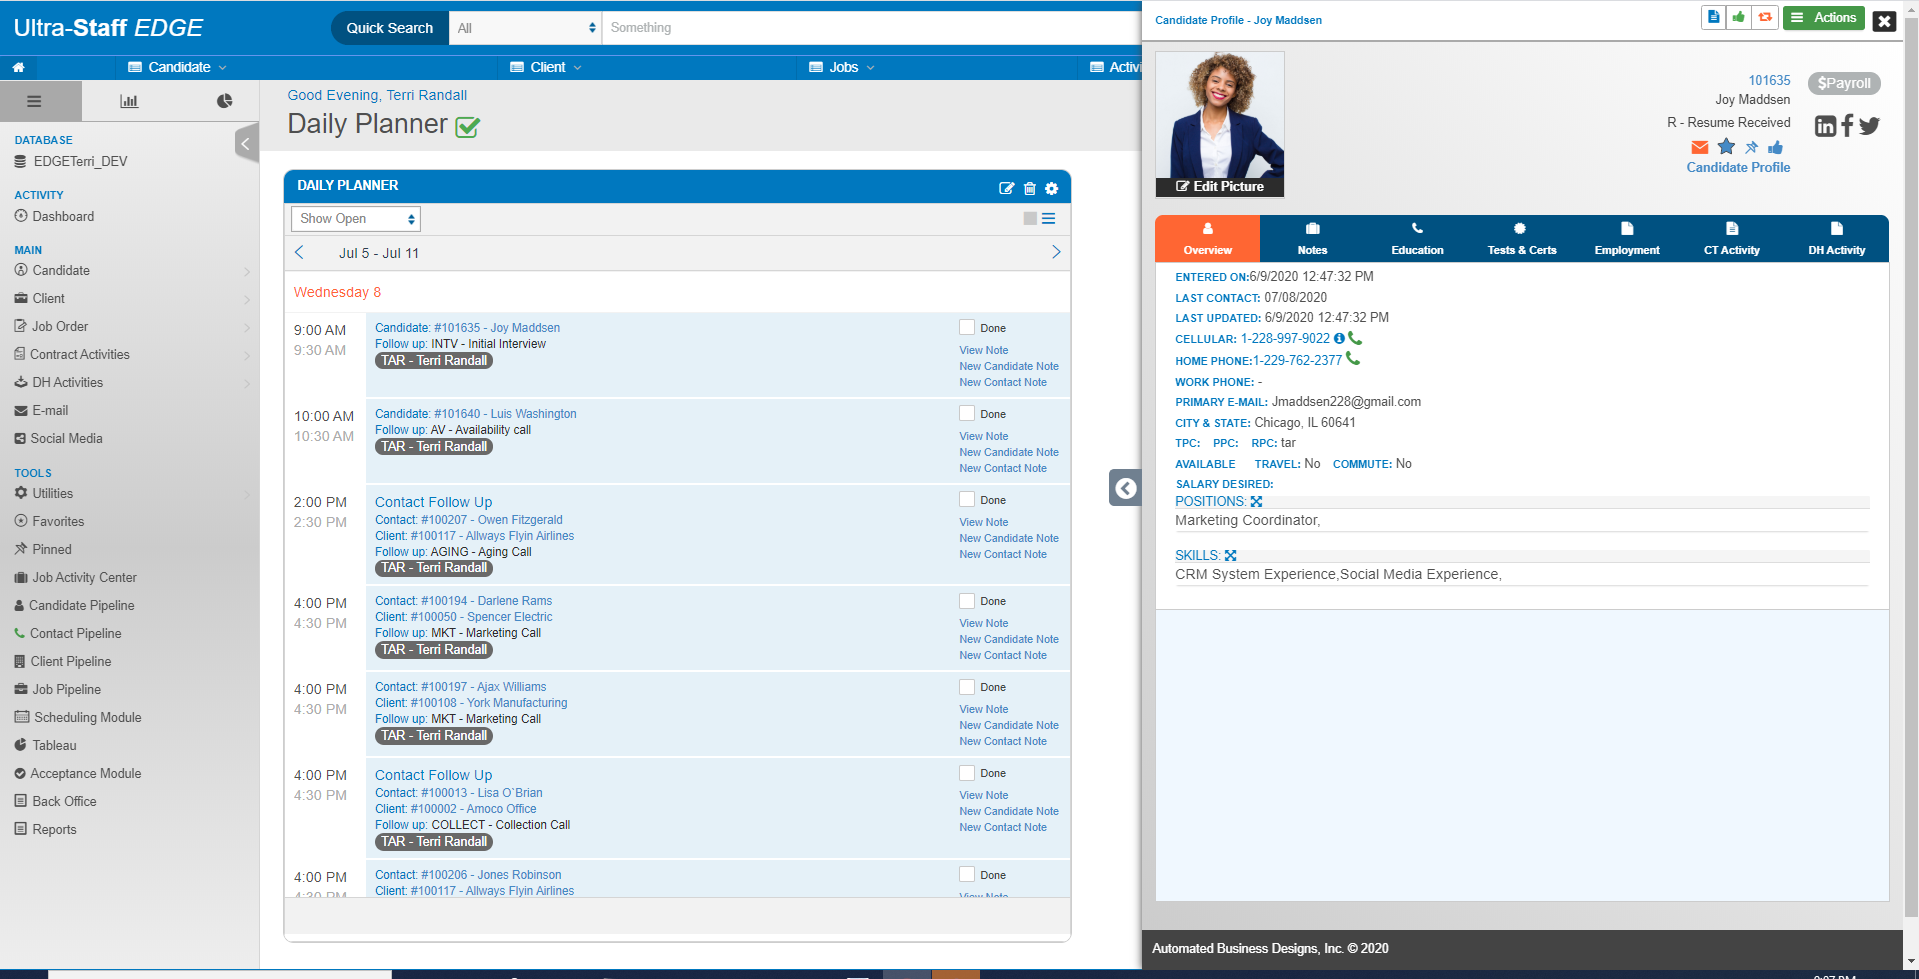 View of Daily Planner in Ultra-Staff EDGE with candidate profile slide out. The profile slide out in Ultra-Staff EDGE allows you to multi-task and view candidate and contact profiles without leaving your screen.